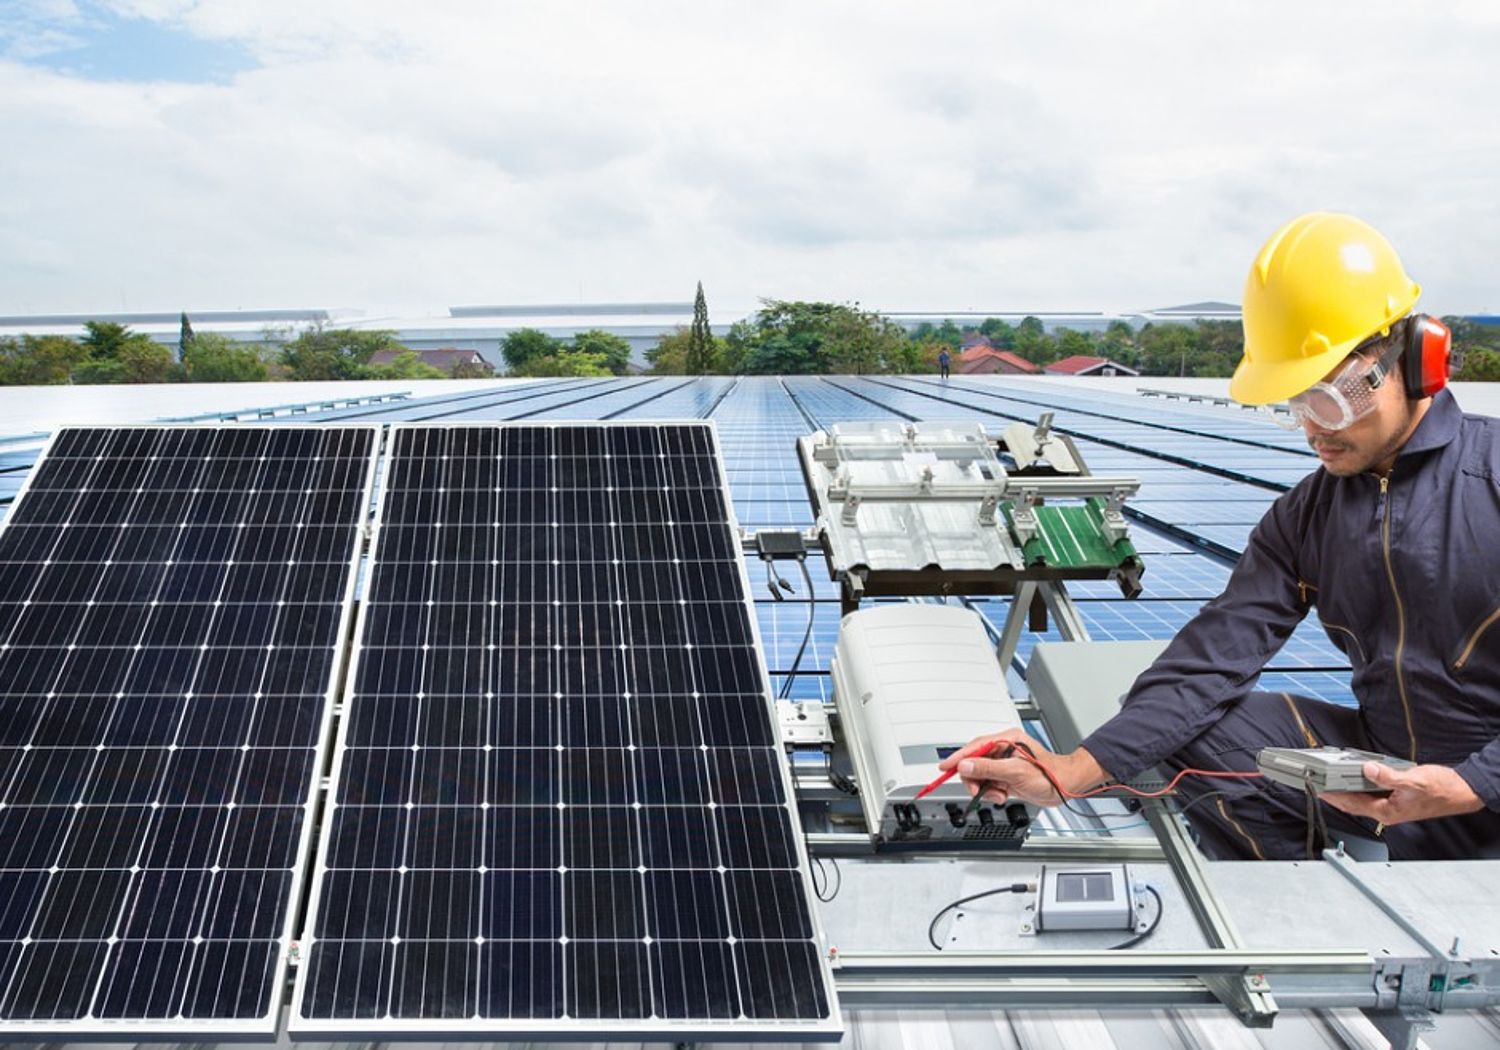 Image showing an engineer performing maintenance on solar panel equipment 